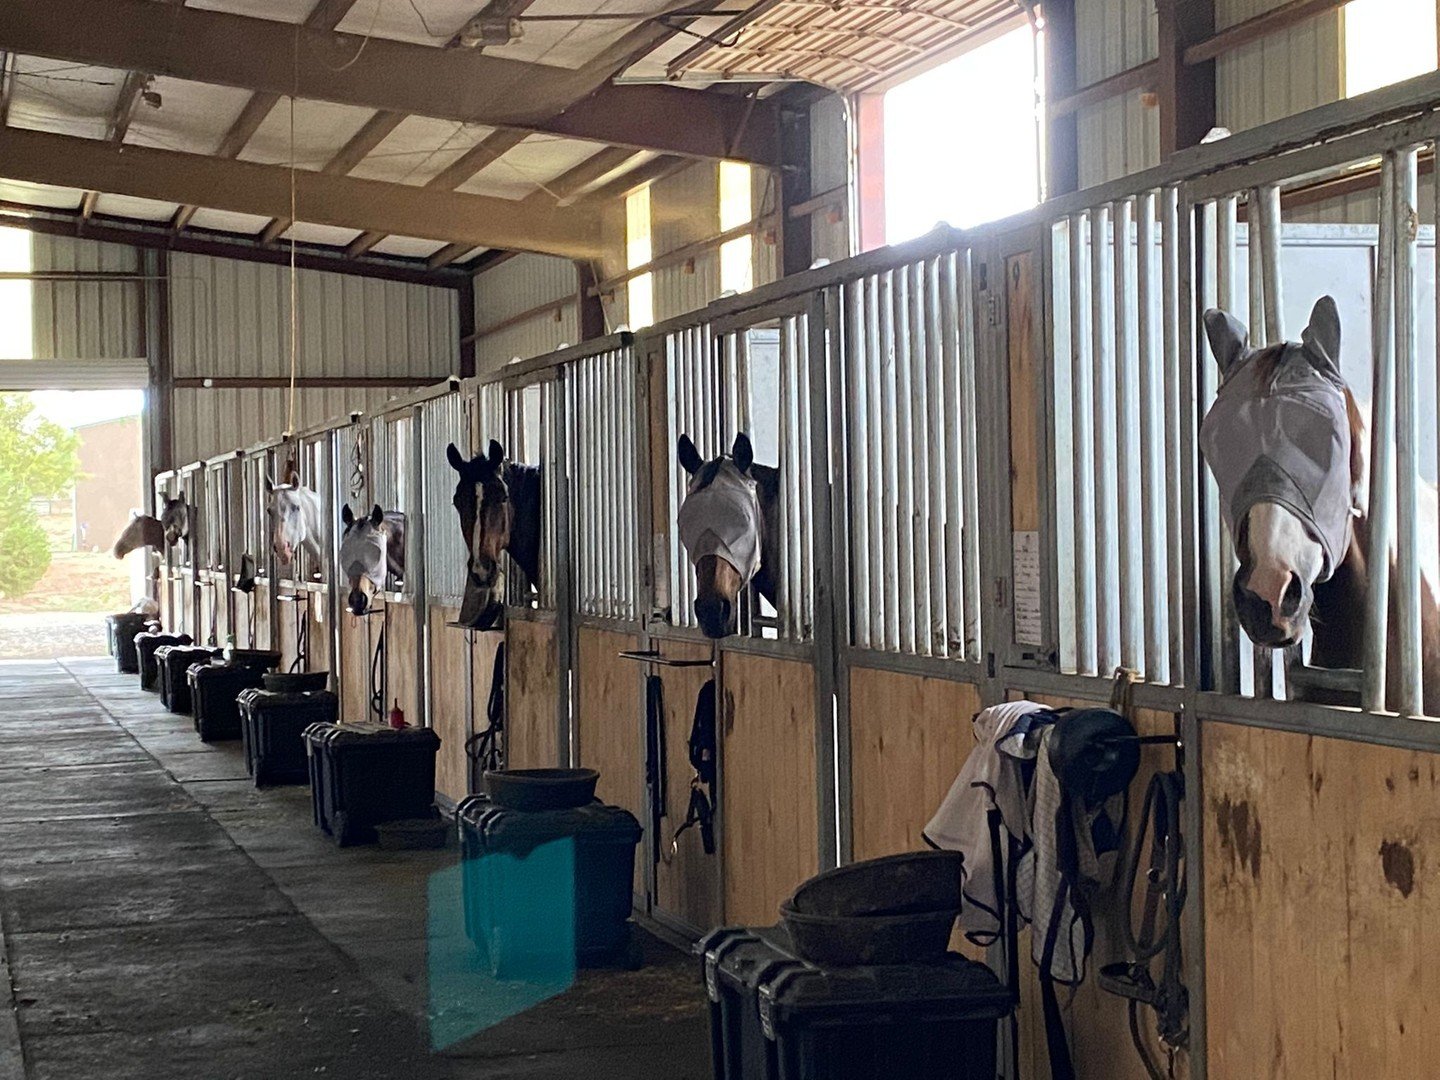 Ever feel like you're being watched?! 👀 

All of the horses have their own exclusive turnouts attached to their stables with personal hay balls, yet they seem to get a lot more enjoyment spying on us in the tack room!

_
#horselove #equestrianlife #